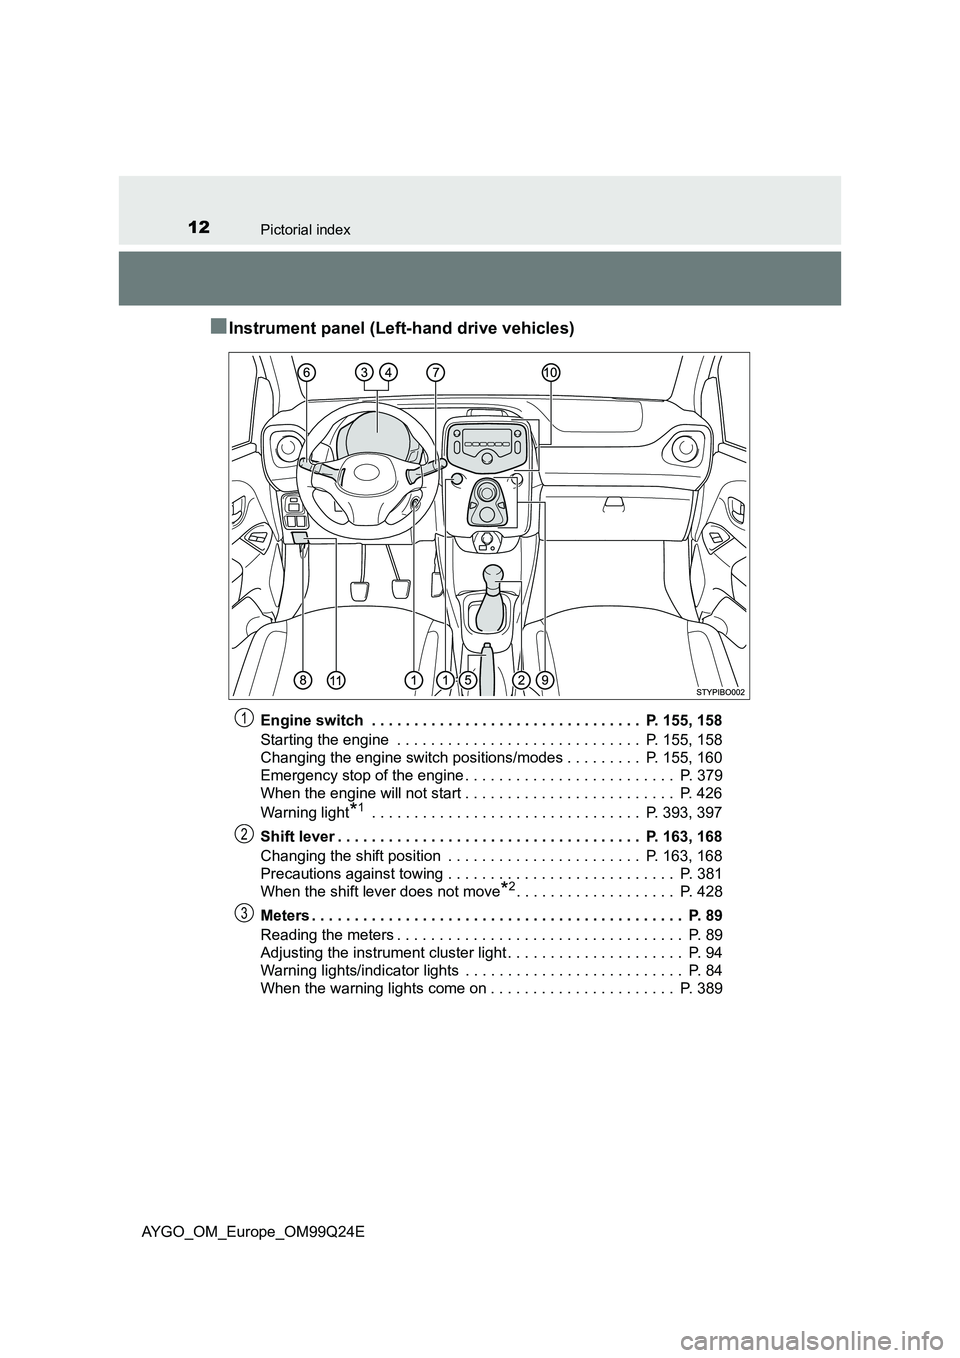 TOYOTA AYGO 2017  Owners Manual (in English) 12Pictorial index
AYGO_OM_Europe_OM99Q24E
■Instrument panel (Left-hand drive vehicles)
Engine switch  . . . . . . . . . . . . . . . . . . . . . . . . . . . . . . . .  P. 155, 158 
Starting the engin